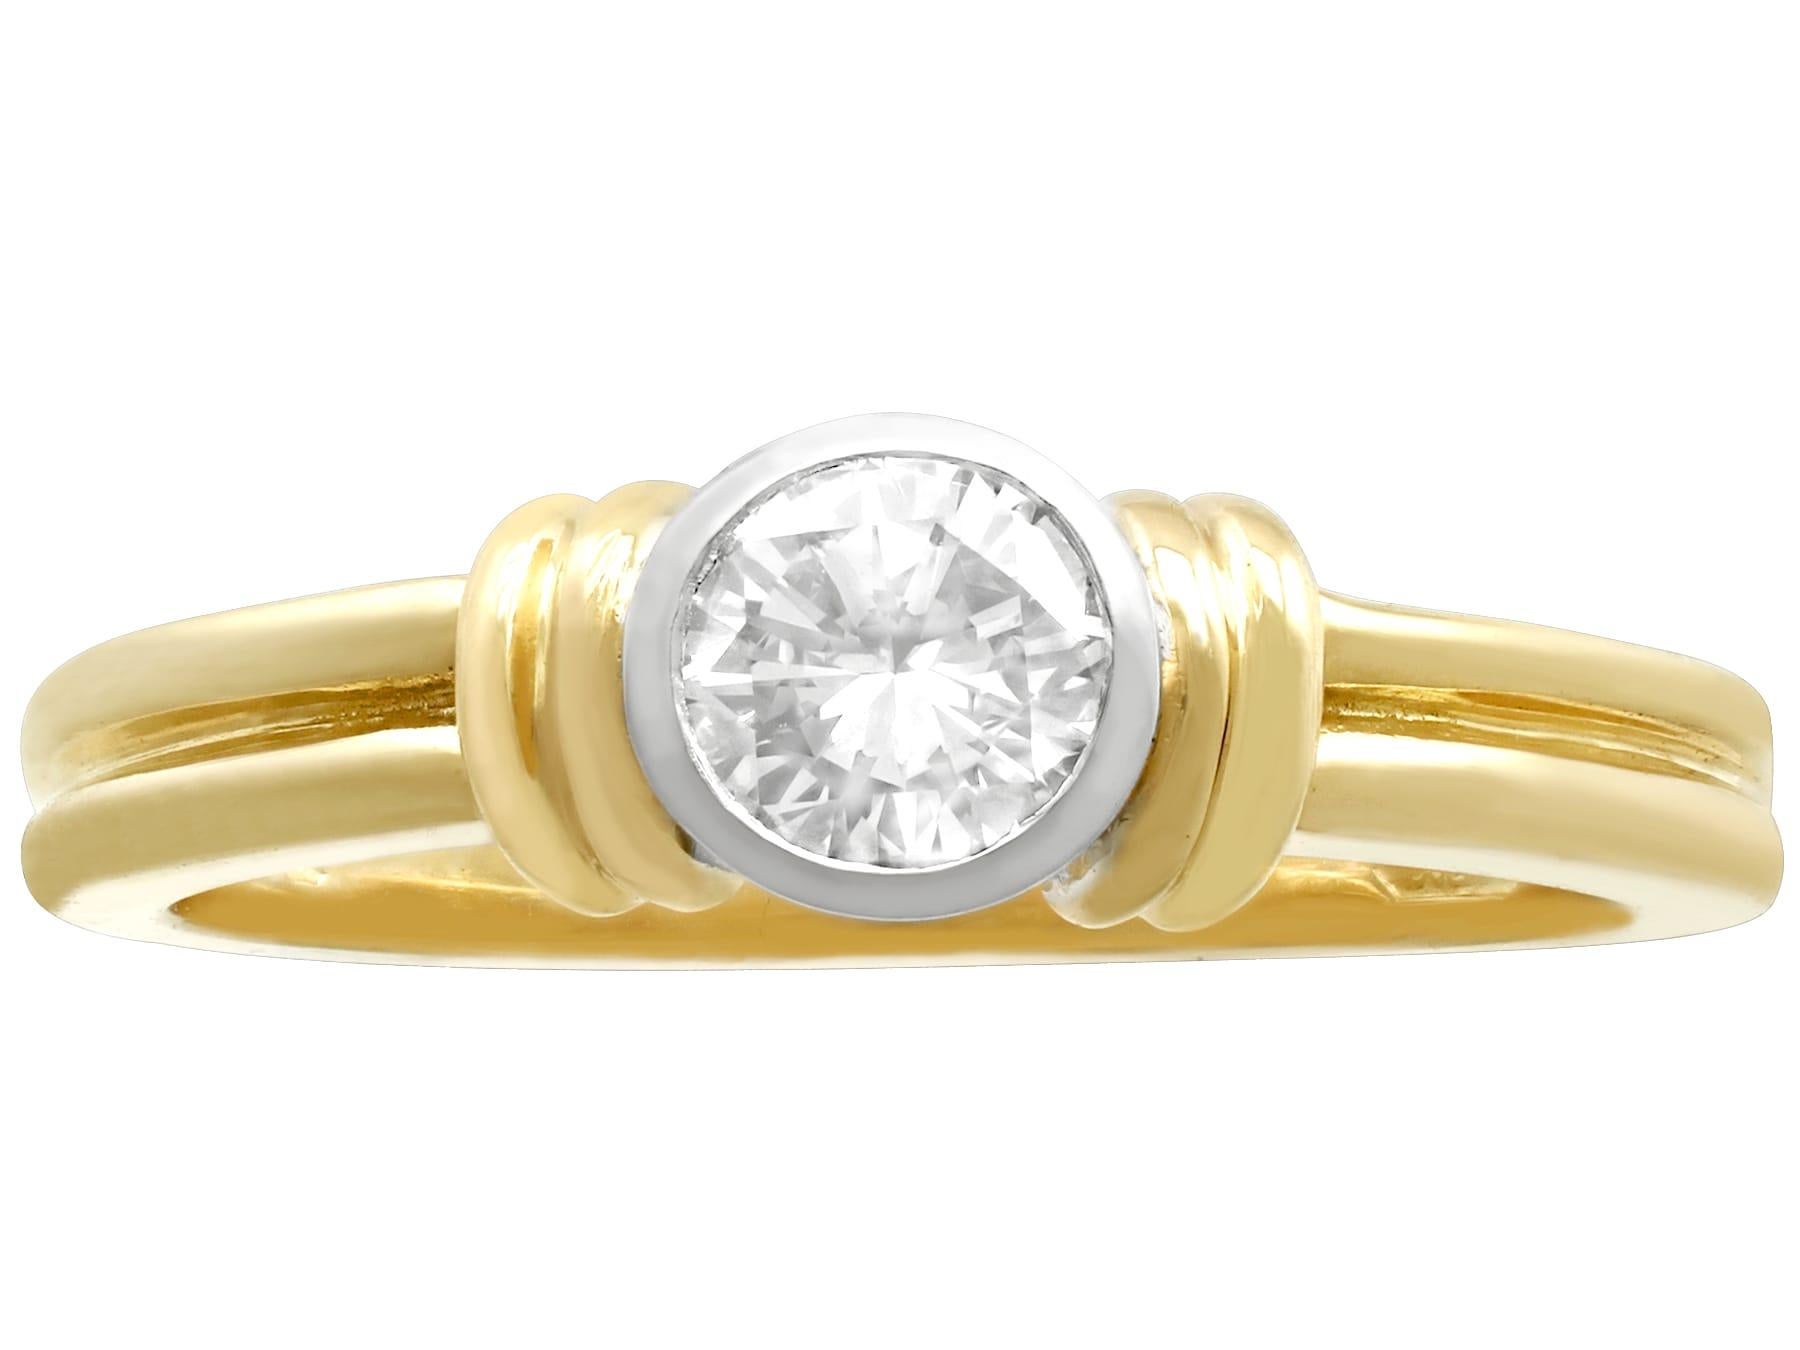 Diamond and Yellow Gold Solitaire Engagement Ring In Excellent Condition For Sale In Jesmond, Newcastle Upon Tyne